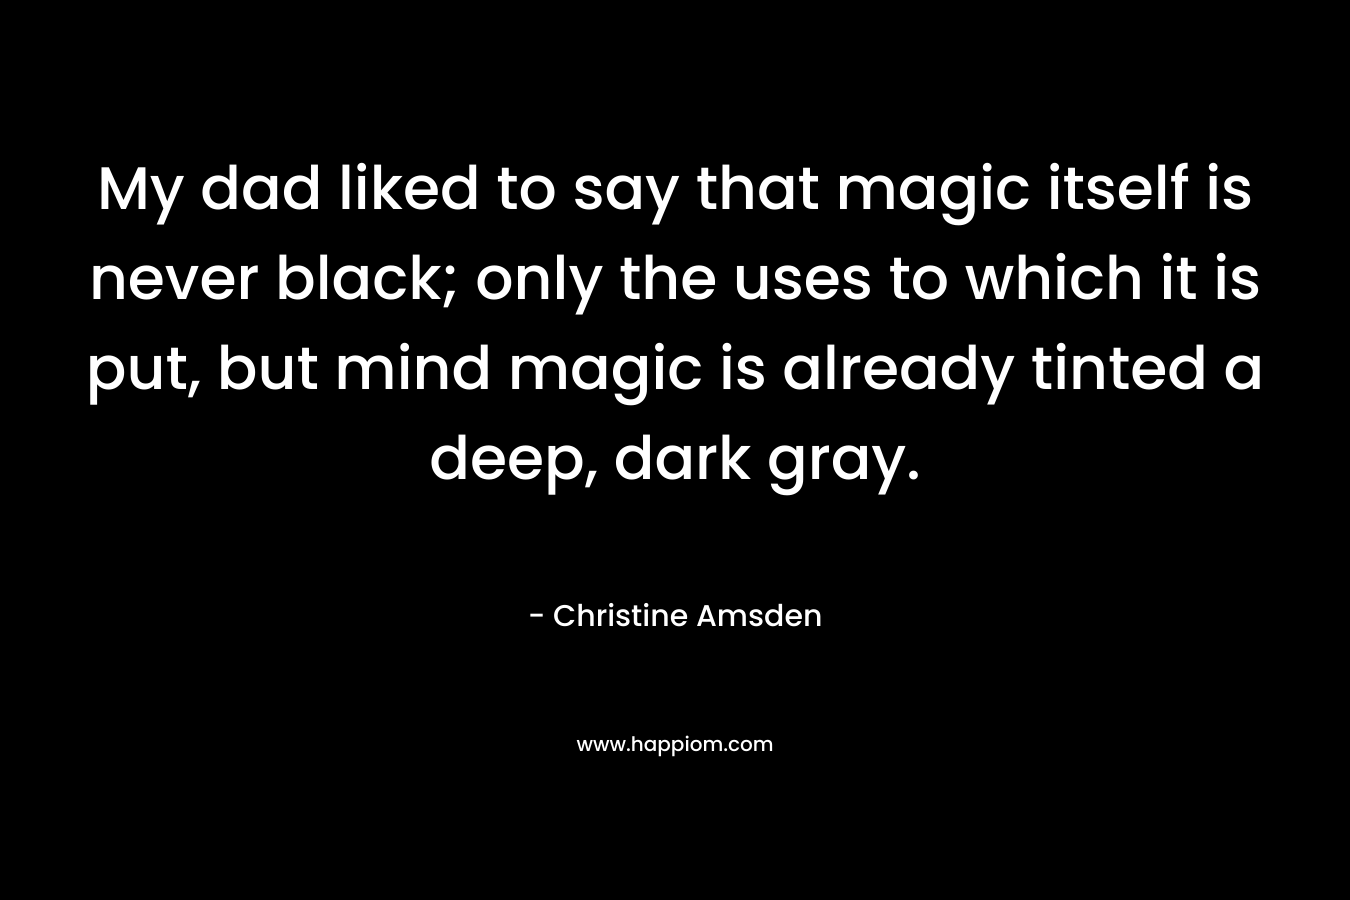 My dad liked to say that magic itself is never black; only the uses to which it is put, but mind magic is already tinted a deep, dark gray. – Christine Amsden